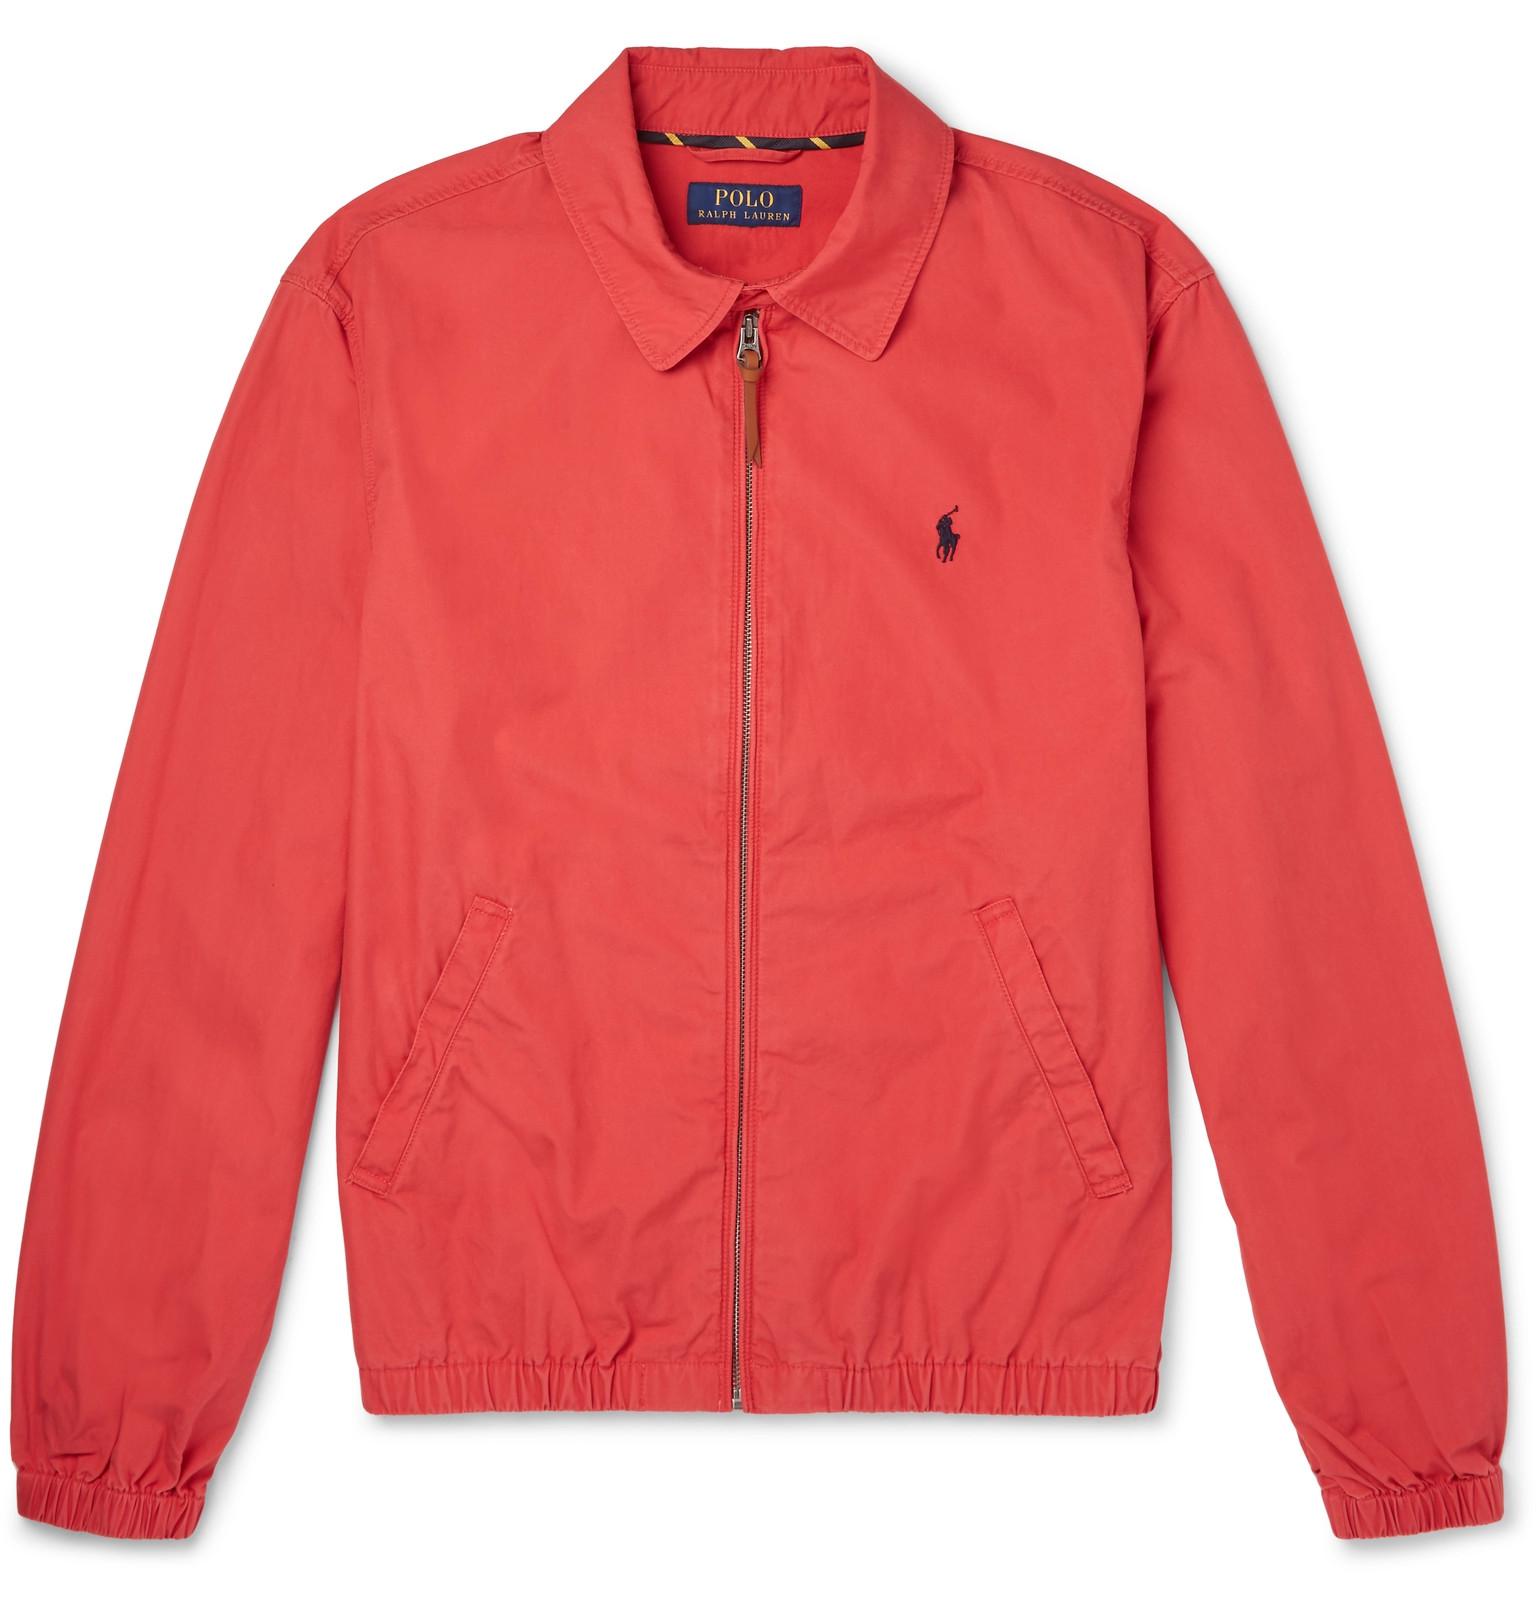 Polo Ralph Lauren Cotton-twill Jacket in Red for Men - Lyst